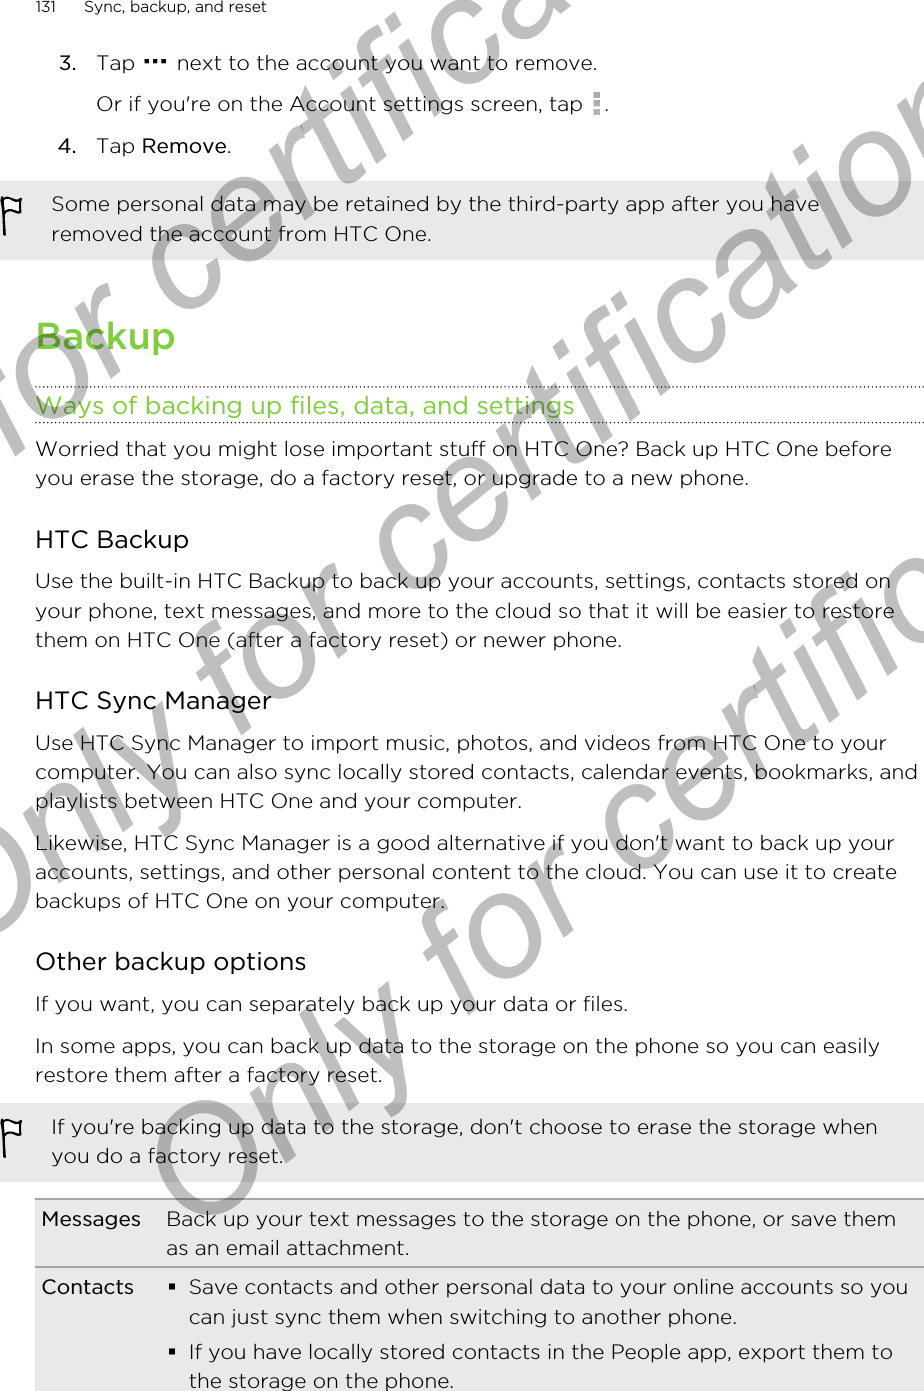 3. Tap   next to the account you want to remove. Or if you&apos;re on the Account settings screen, tap  .4. Tap Remove.Some personal data may be retained by the third-party app after you haveremoved the account from HTC One.BackupWays of backing up files, data, and settingsWorried that you might lose important stuff on HTC One? Back up HTC One beforeyou erase the storage, do a factory reset, or upgrade to a new phone.HTC BackupUse the built-in HTC Backup to back up your accounts, settings, contacts stored onyour phone, text messages, and more to the cloud so that it will be easier to restorethem on HTC One (after a factory reset) or newer phone.HTC Sync ManagerUse HTC Sync Manager to import music, photos, and videos from HTC One to yourcomputer. You can also sync locally stored contacts, calendar events, bookmarks, andplaylists between HTC One and your computer.Likewise, HTC Sync Manager is a good alternative if you don&apos;t want to back up youraccounts, settings, and other personal content to the cloud. You can use it to createbackups of HTC One on your computer.Other backup optionsIf you want, you can separately back up your data or files.In some apps, you can back up data to the storage on the phone so you can easilyrestore them after a factory reset.If you&apos;re backing up data to the storage, don&apos;t choose to erase the storage whenyou do a factory reset.Messages Back up your text messages to the storage on the phone, or save themas an email attachment.Contacts §Save contacts and other personal data to your online accounts so youcan just sync them when switching to another phone.§If you have locally stored contacts in the People app, export them tothe storage on the phone.131 Sync, backup, and resetOnly for certification  Only for certification  Only for certification